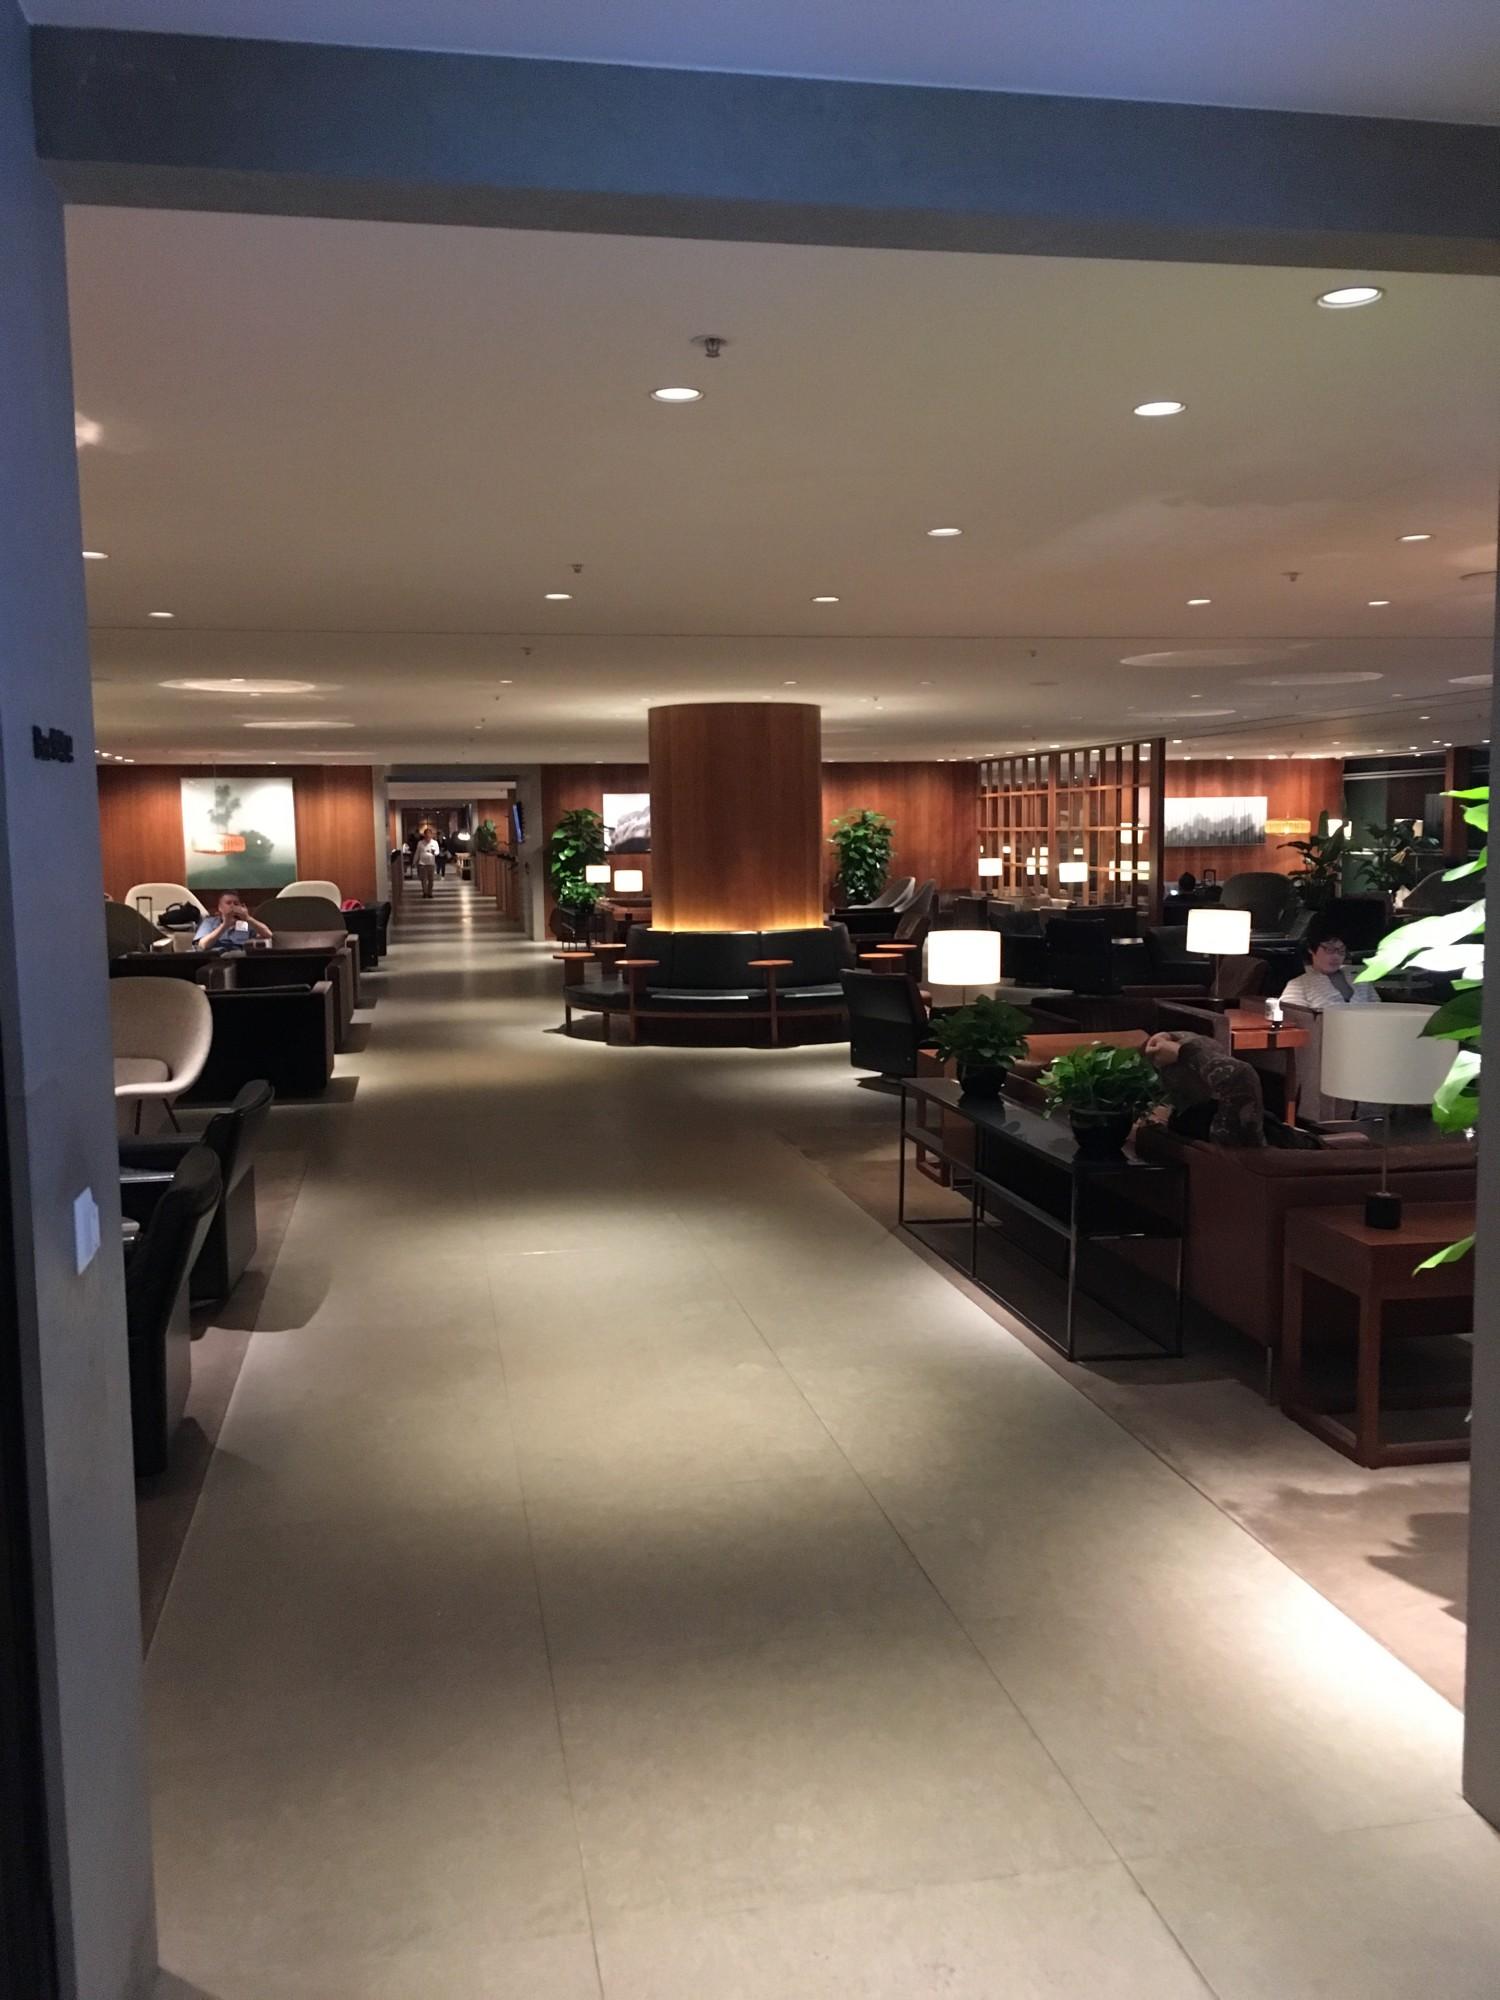 Cathay Pacific The Pier Business Class Lounge image 57 of 61